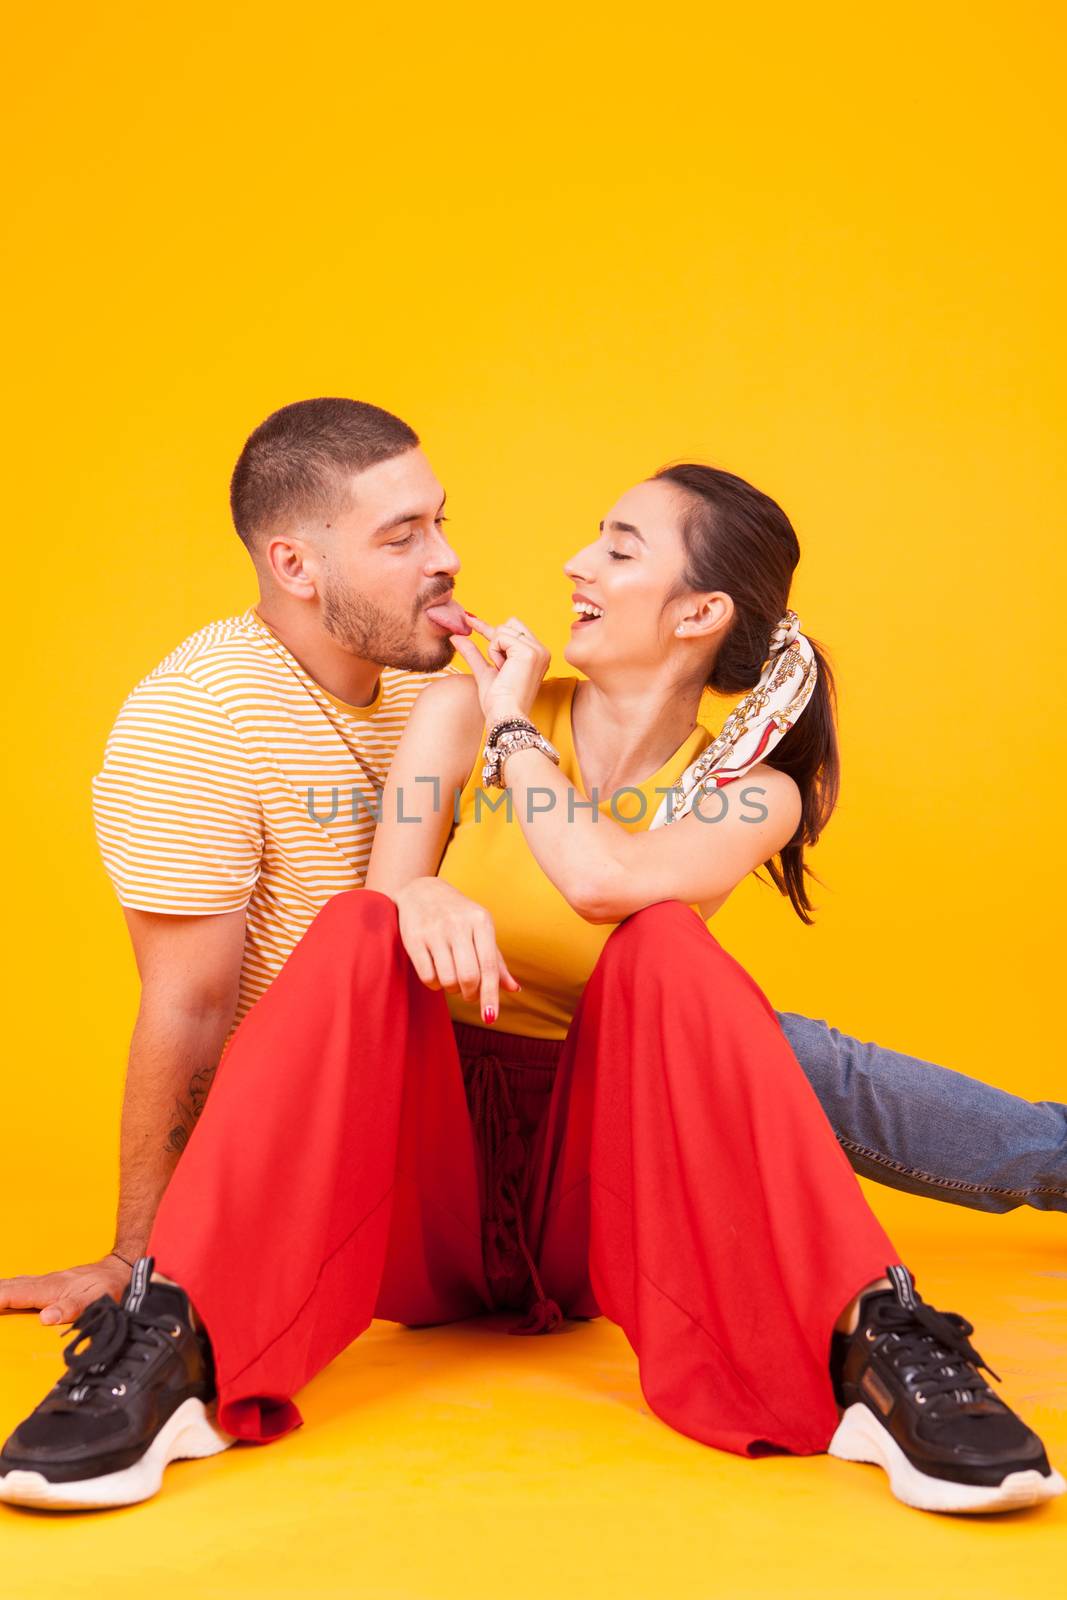 Beautiful young couple acting silly in studio over yellow background. Attractive couple.